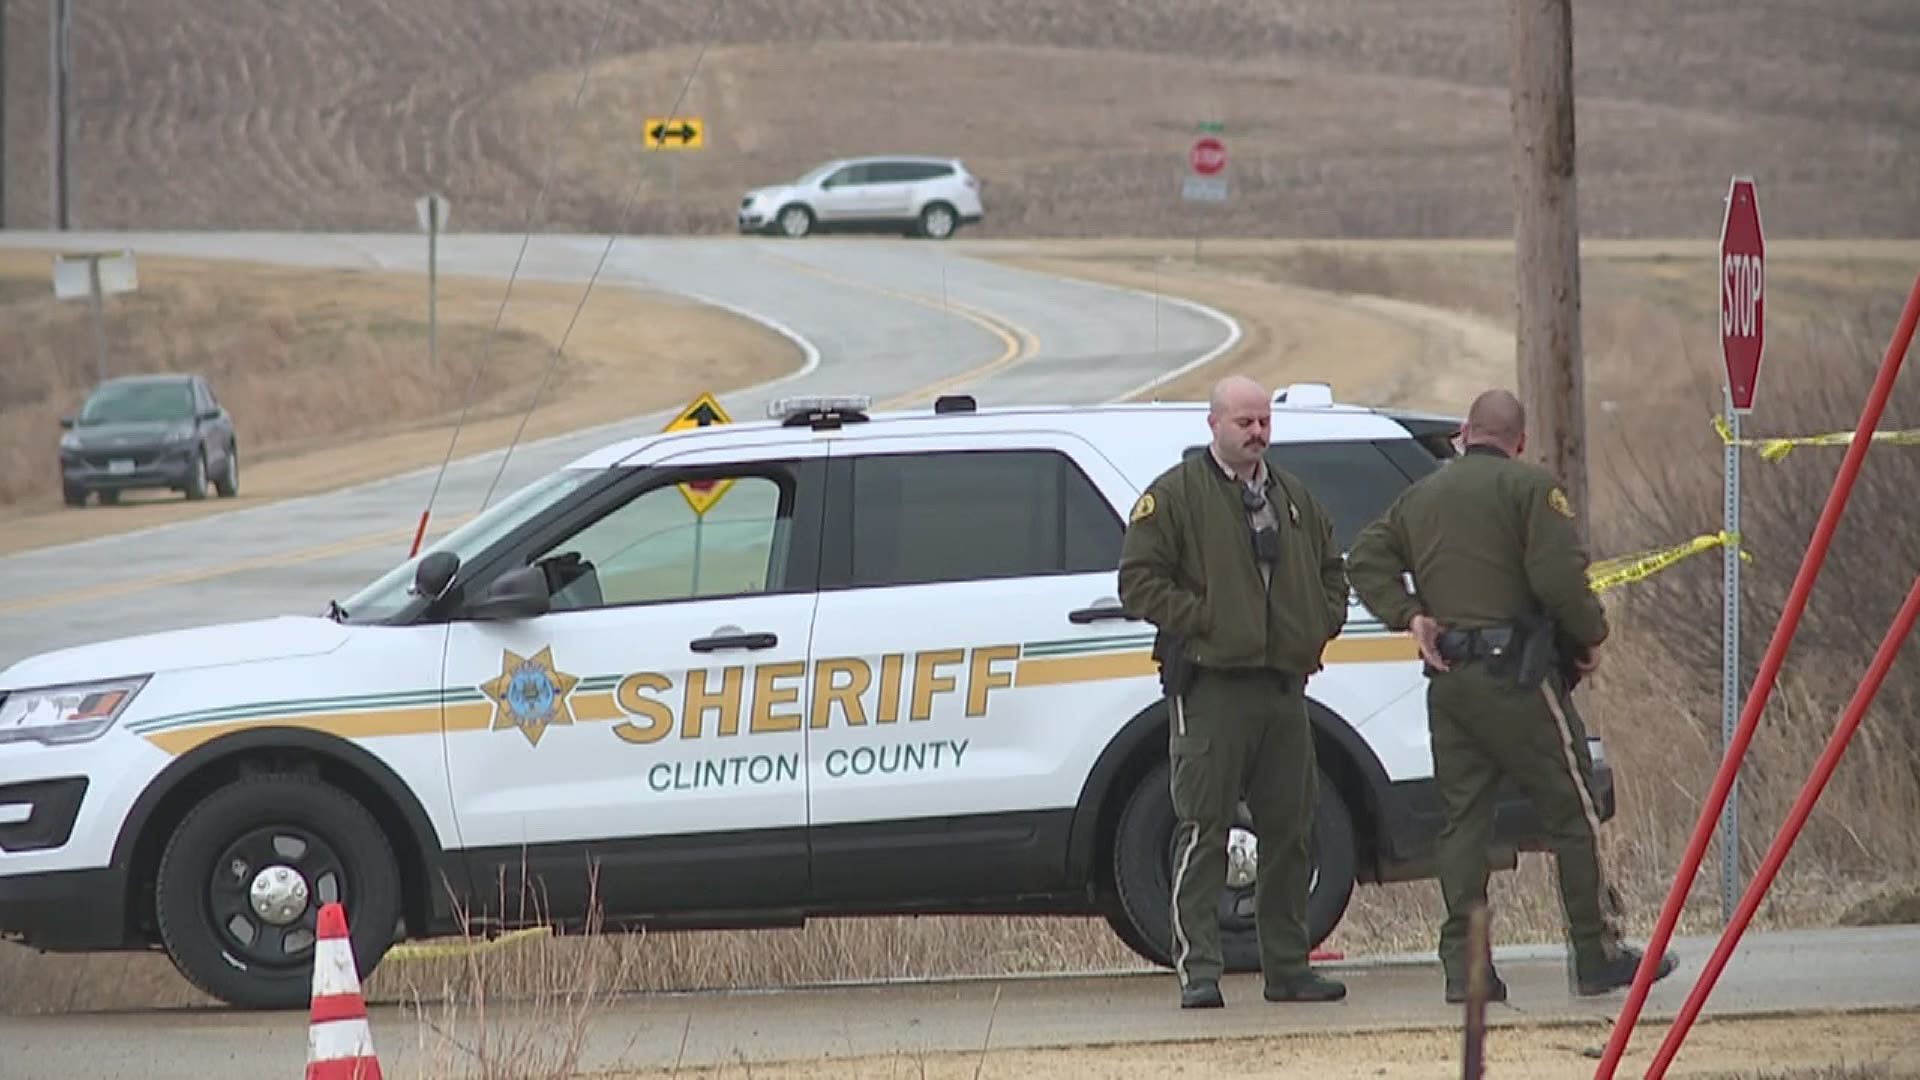 Clinton County Sheriff Bill Greenwalt said the remains were found by two fishermen.  The remains were reported immediately to local officials, around 6:30 p.m.